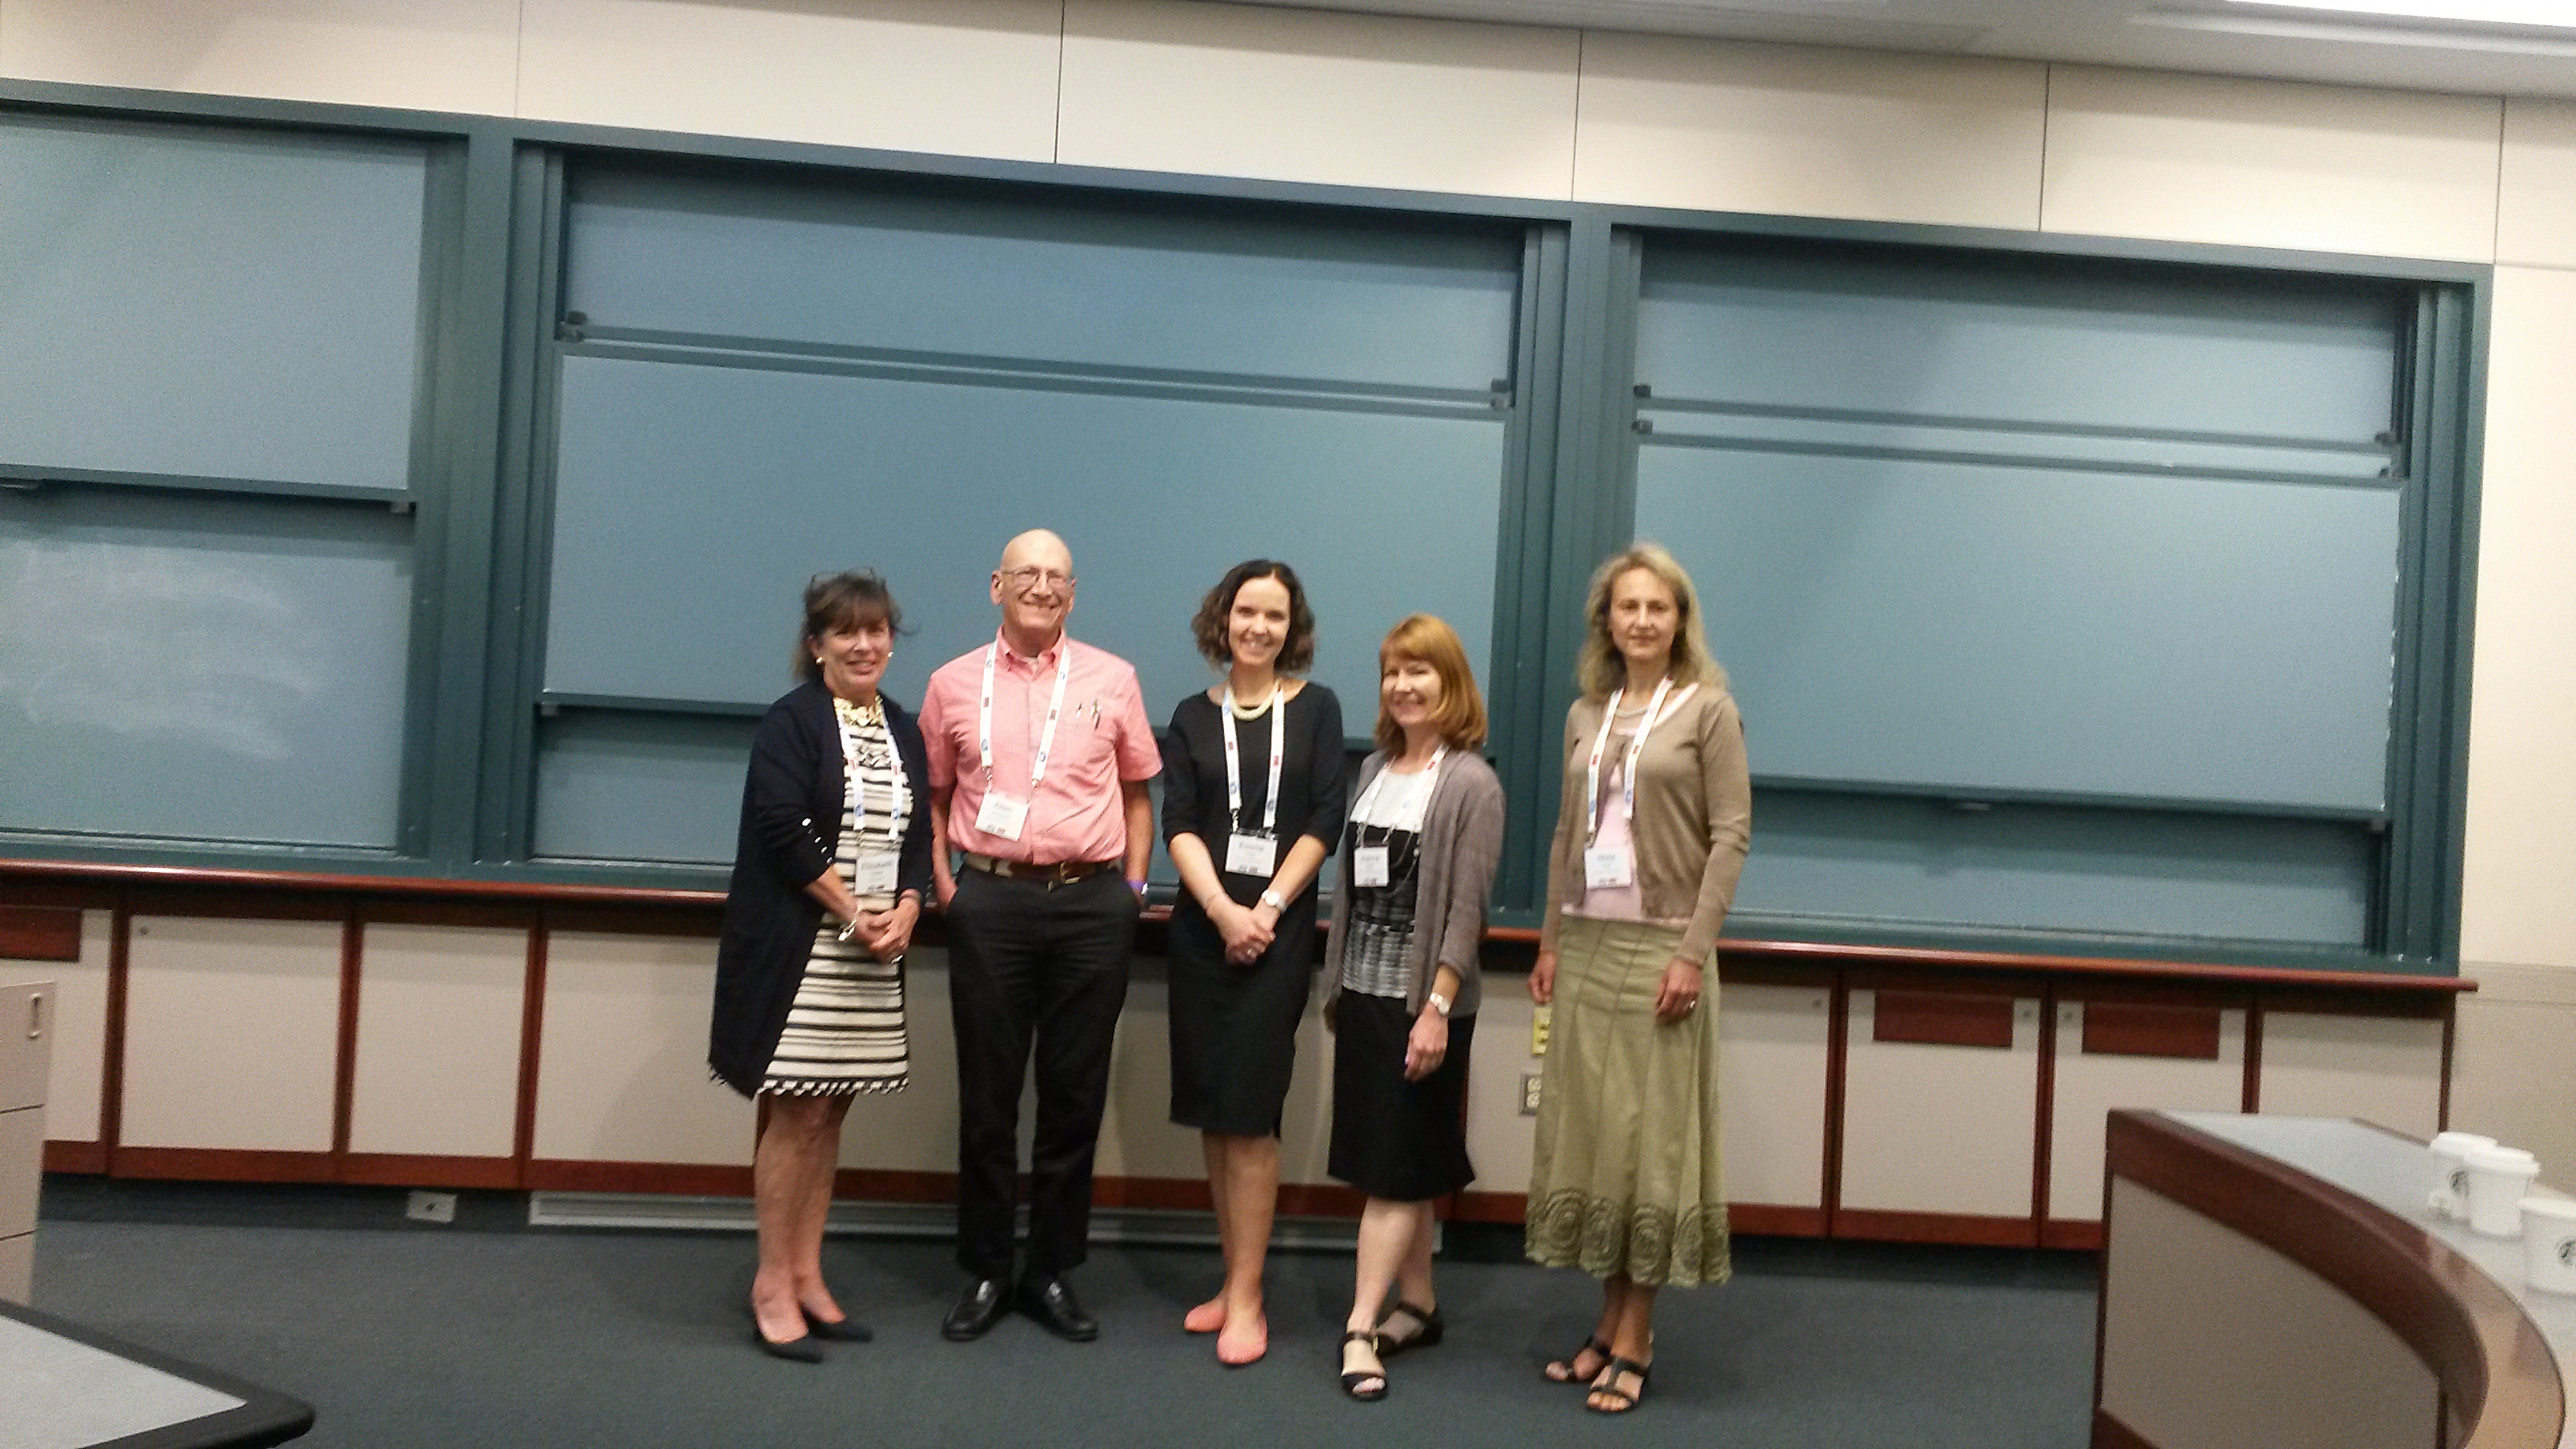 The organizational committee for Teaching Health Economics is pictured from left to right, Elizabeth Seidler, Allen Goodman, Emma Frew, Joanne Spetz, Maia Platt for 2017 meeting